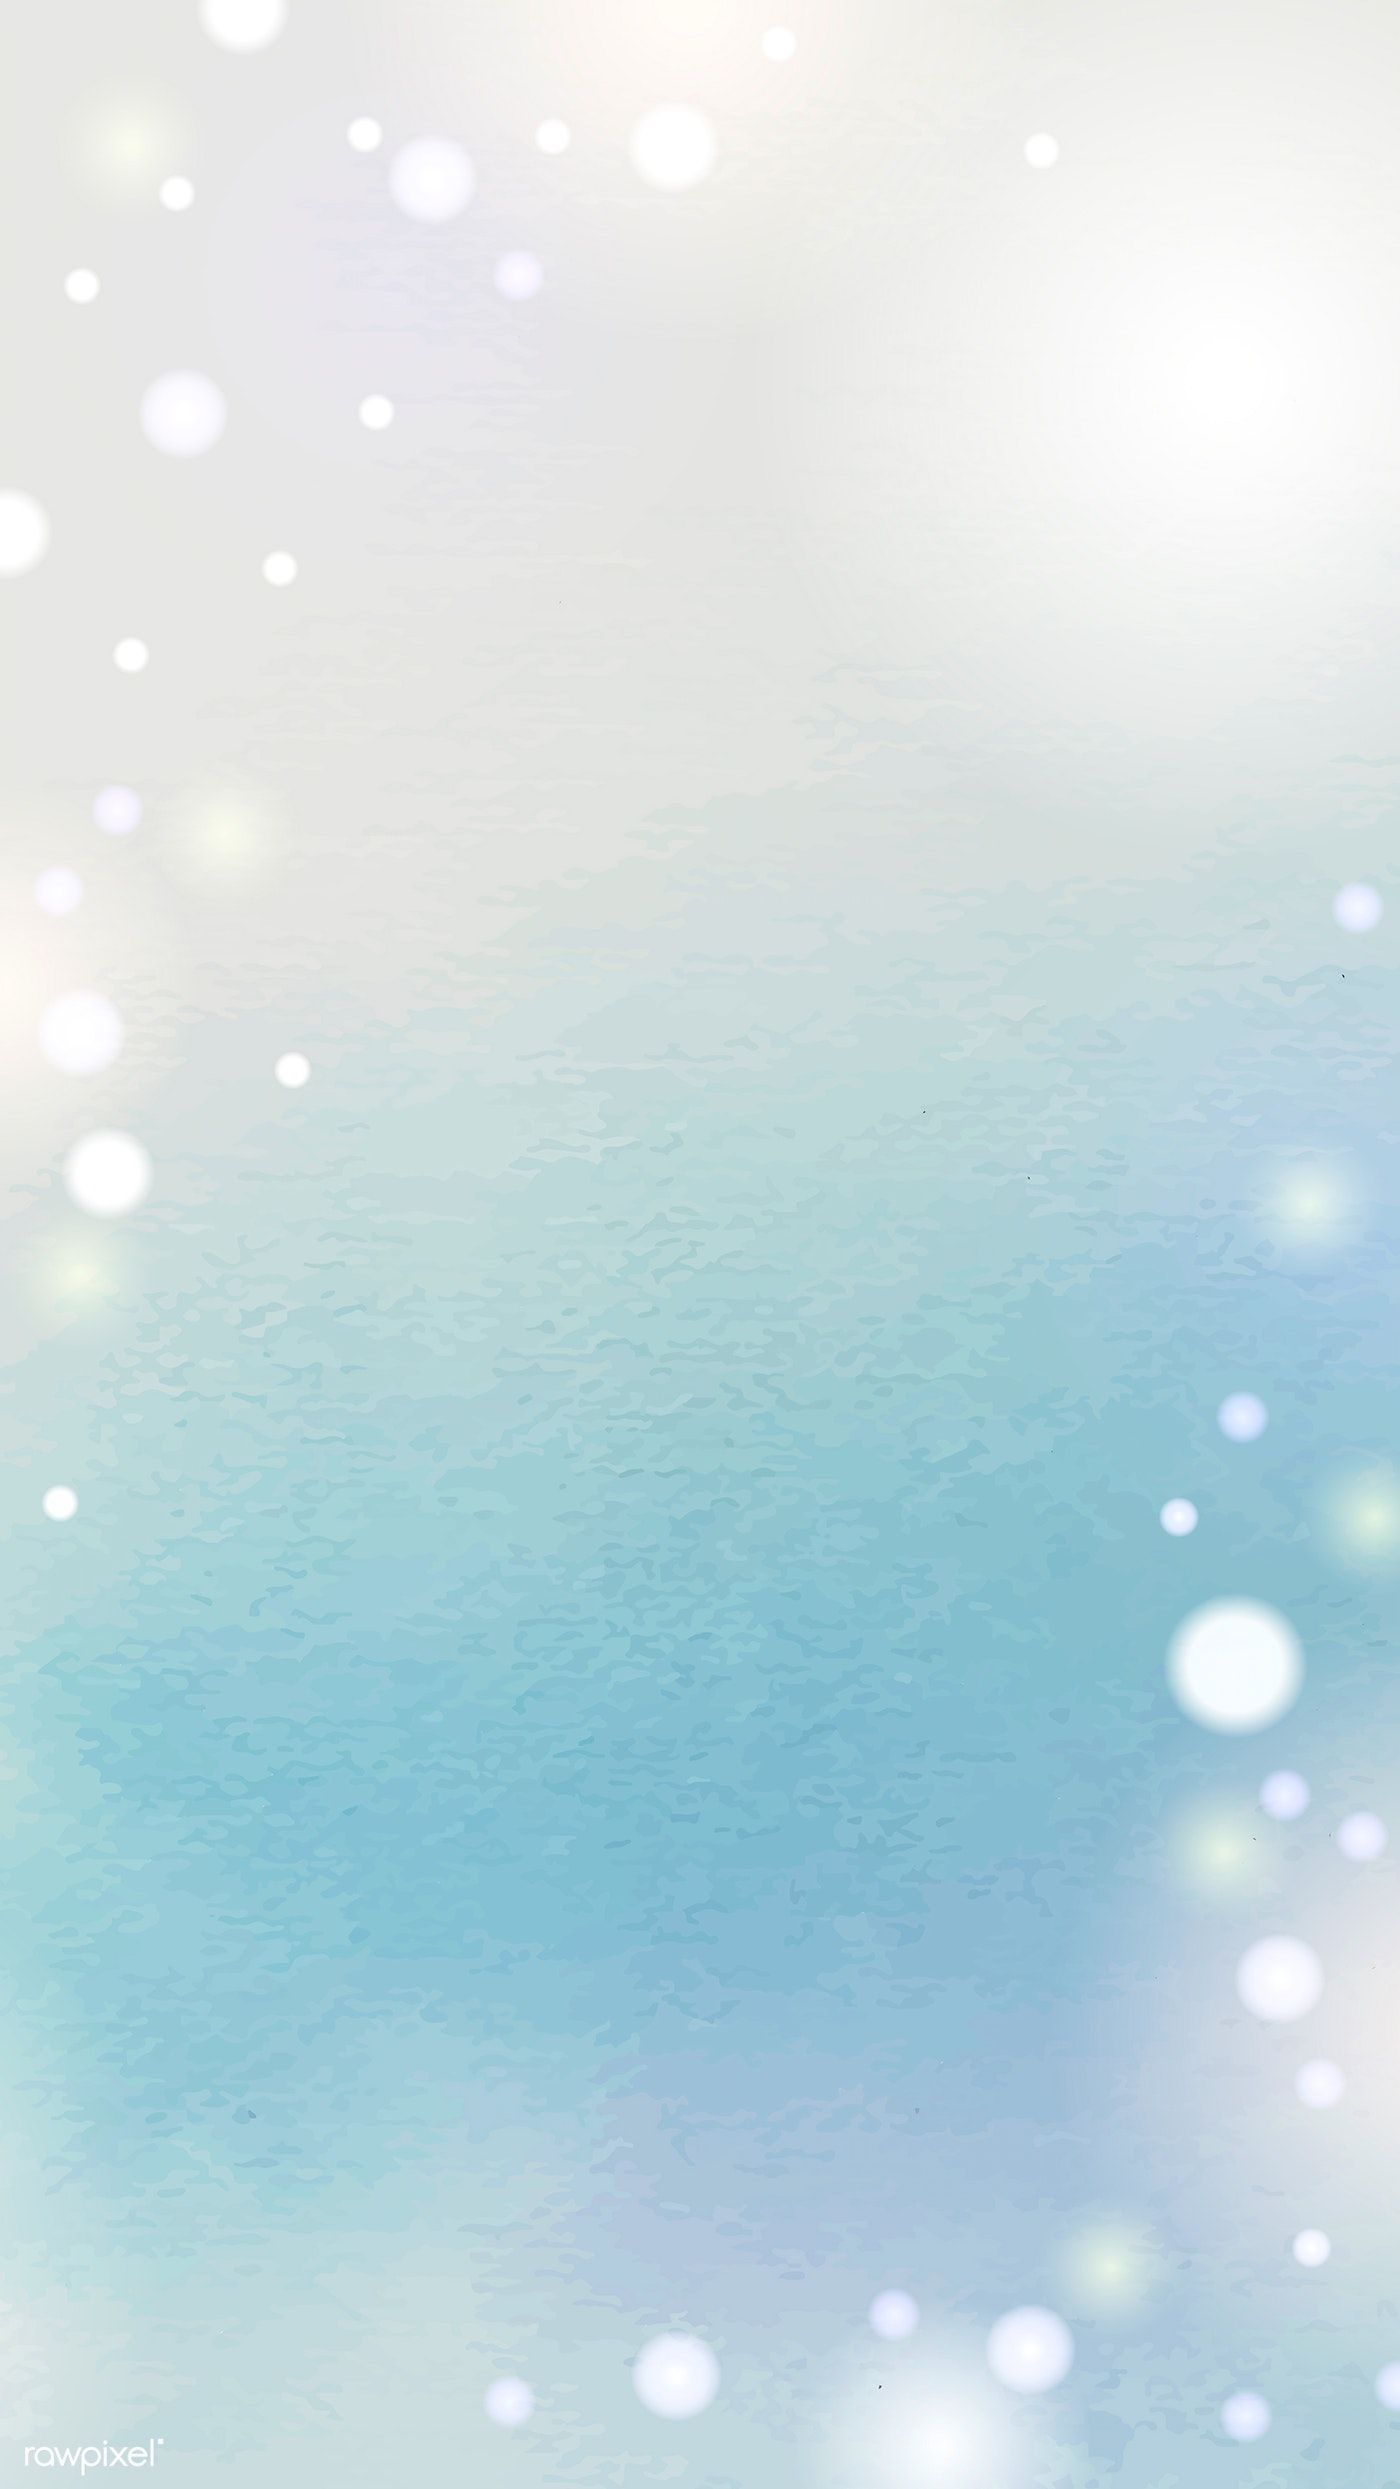 Dreamy winter watercolor mobile background. Royalty free stock